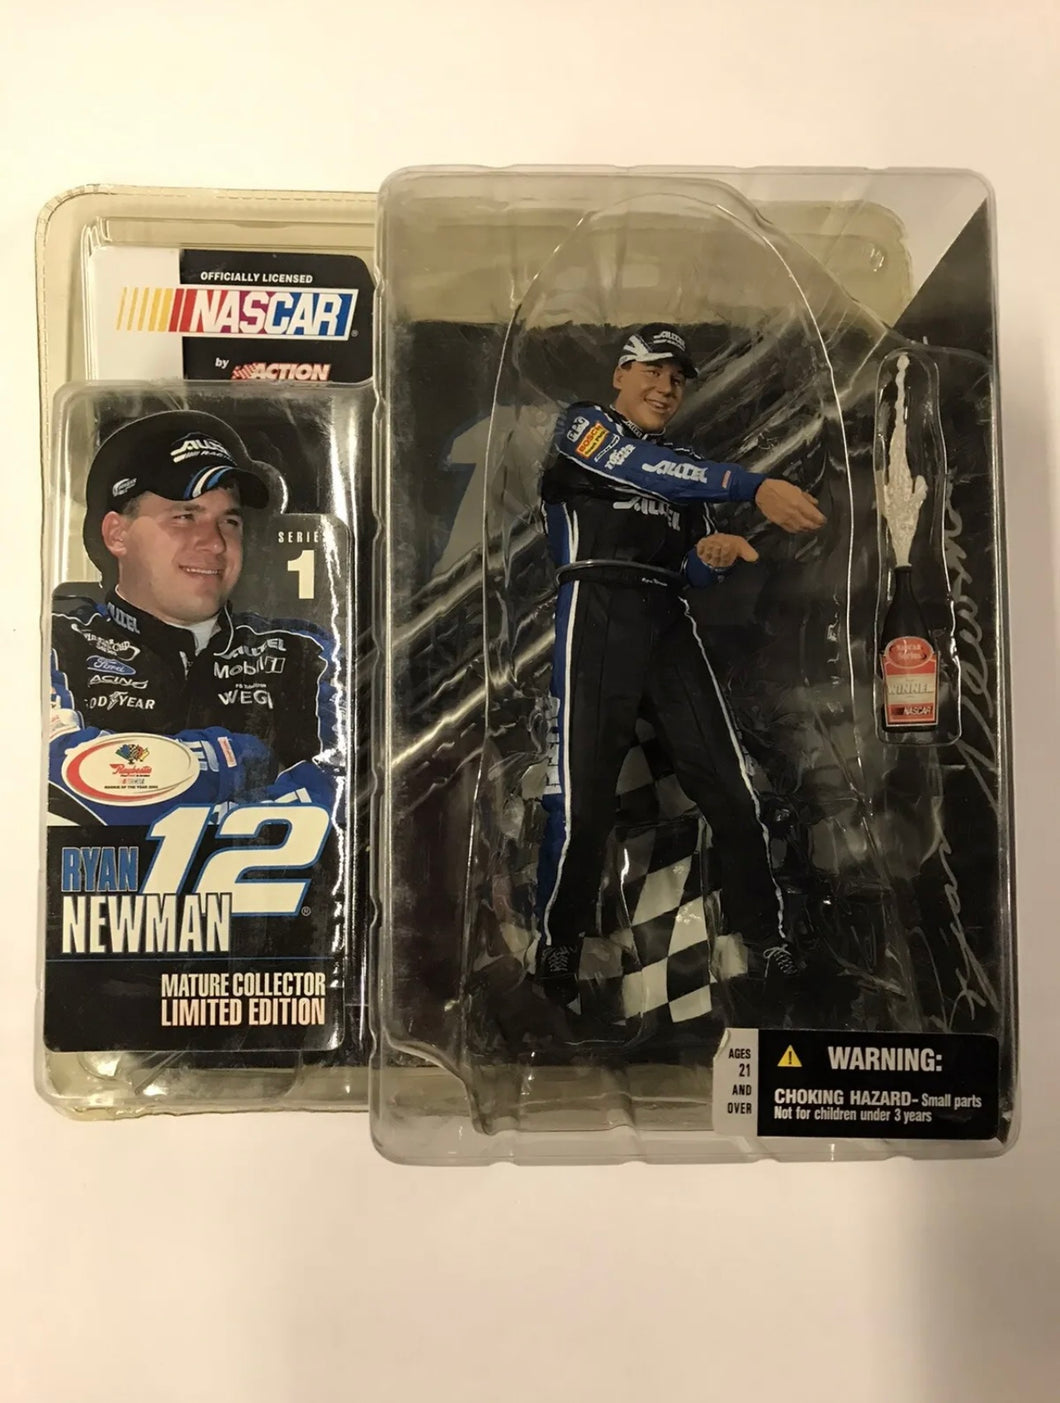 Nascar Ryan Newman Mature Collector Limited Edition Series 1 By Action McFarlane